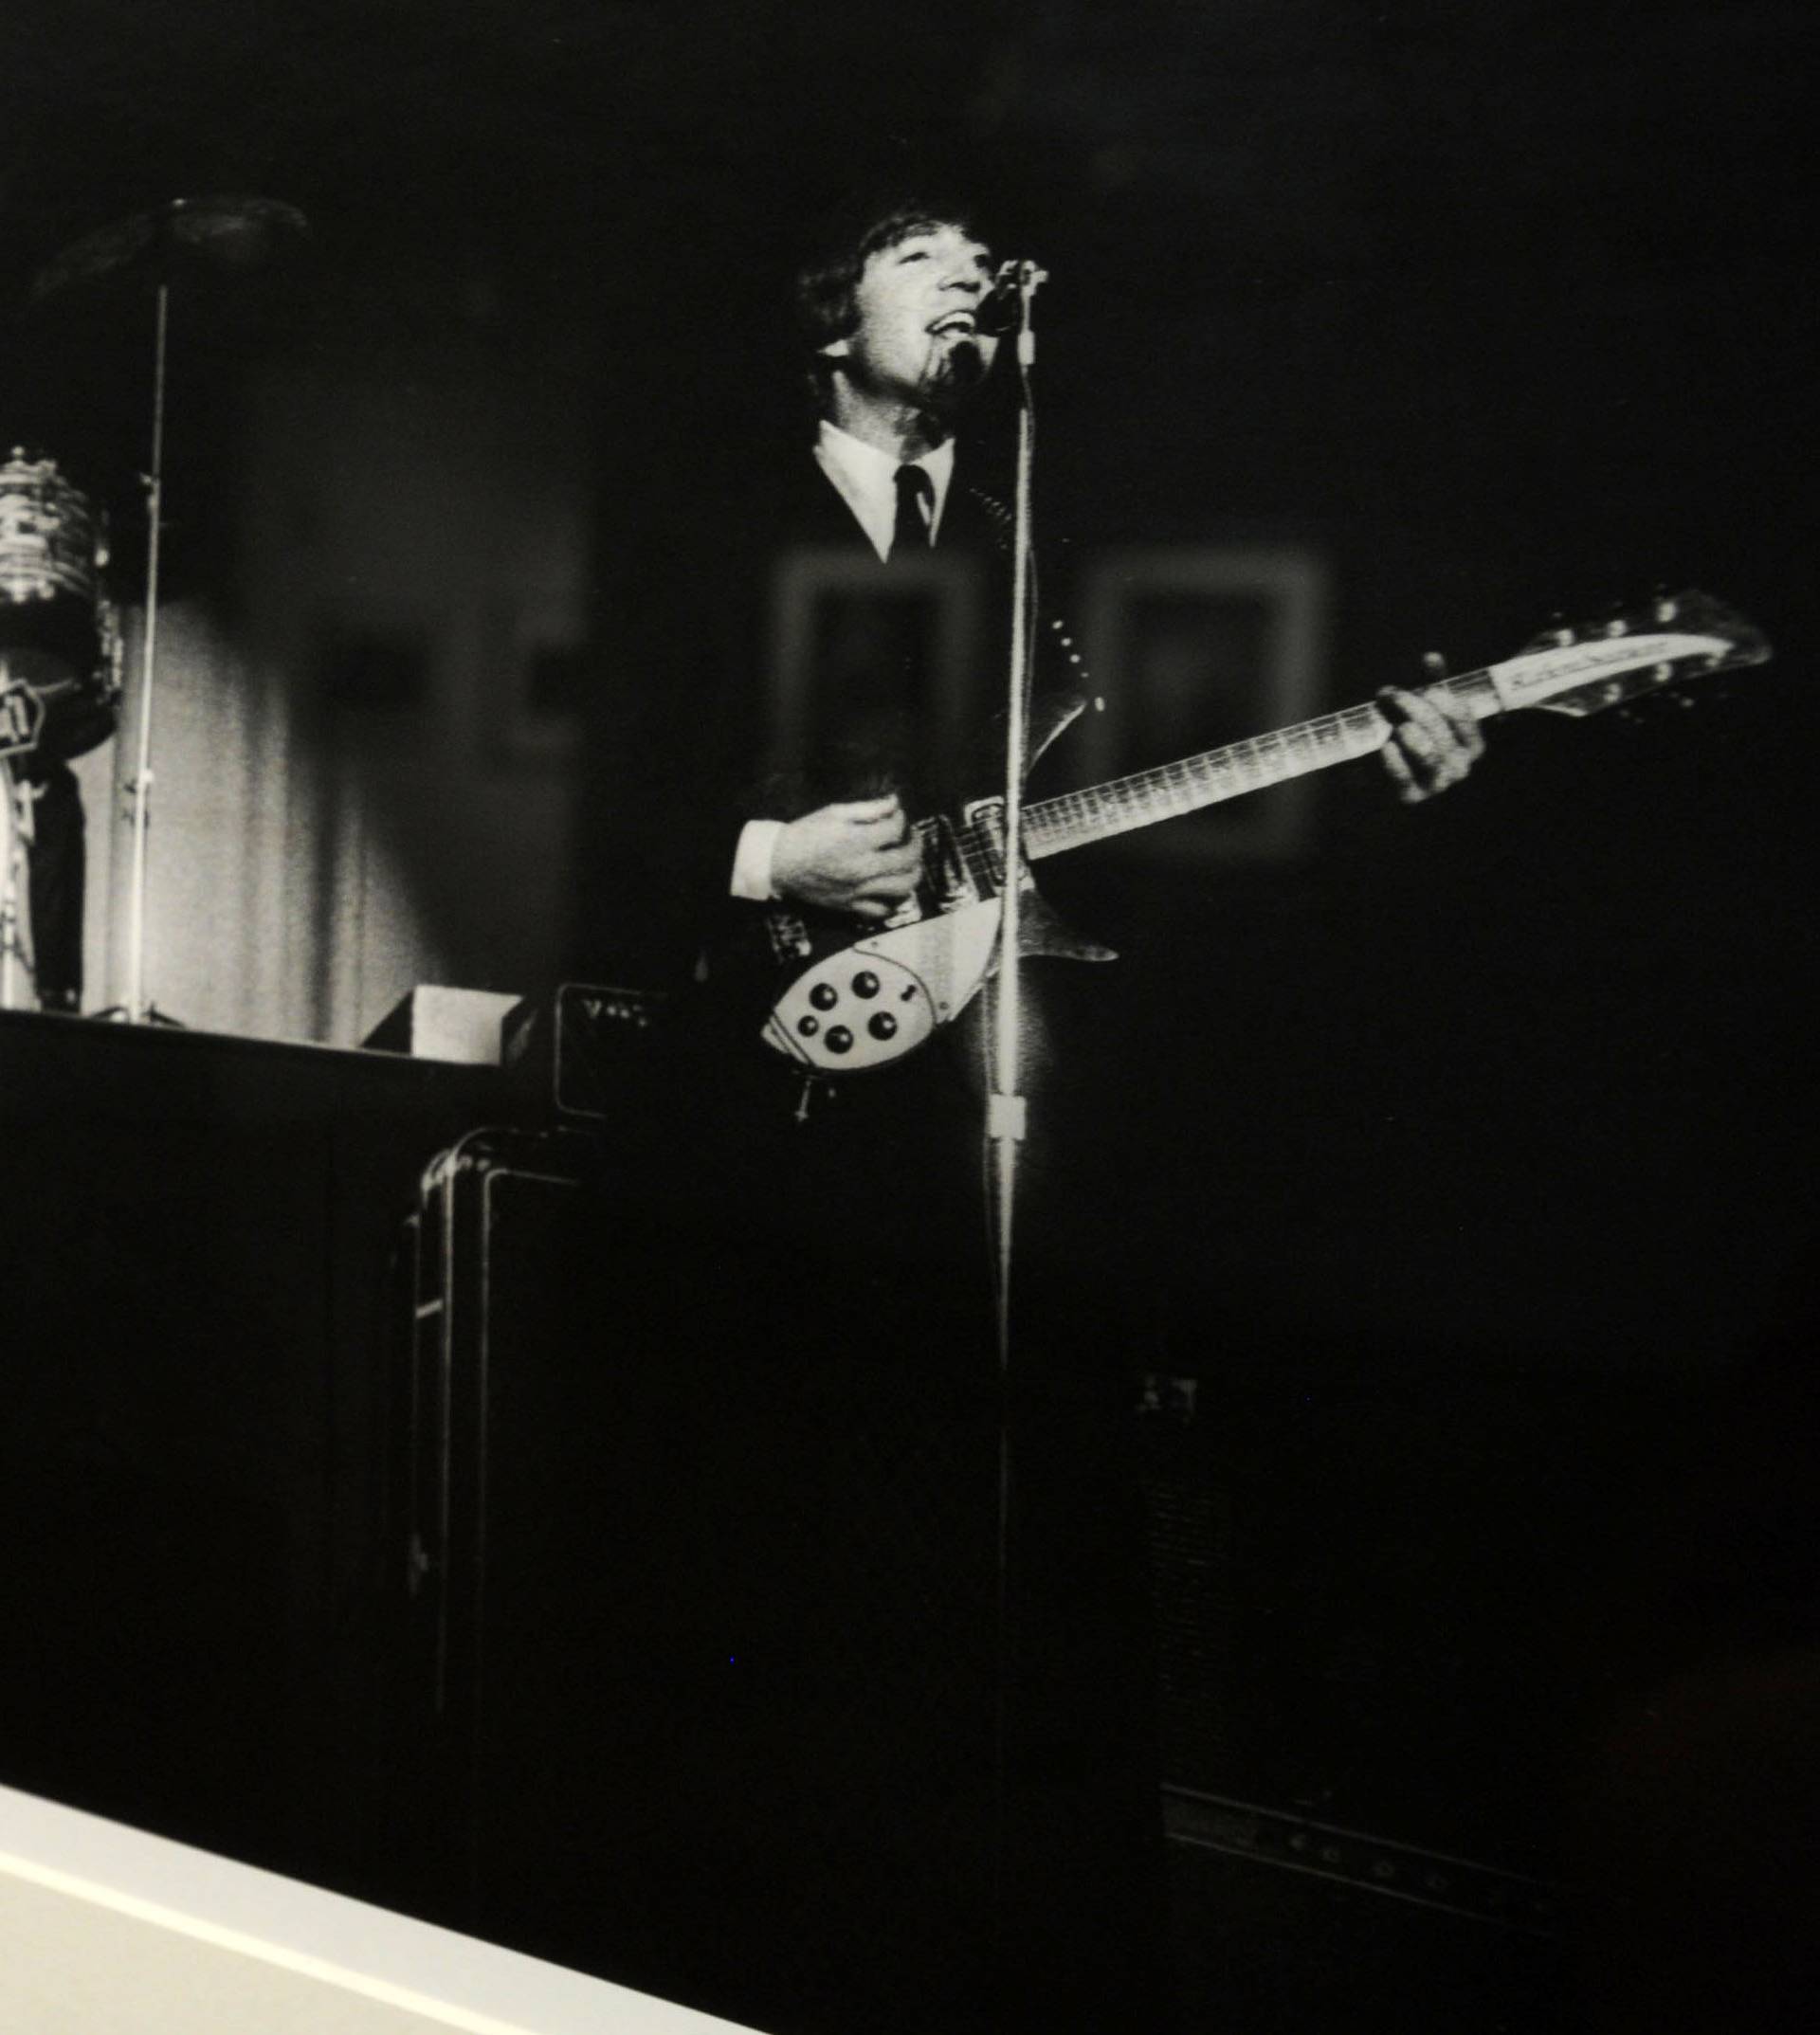 Christie's will auction unseen photos of Beatles - New York